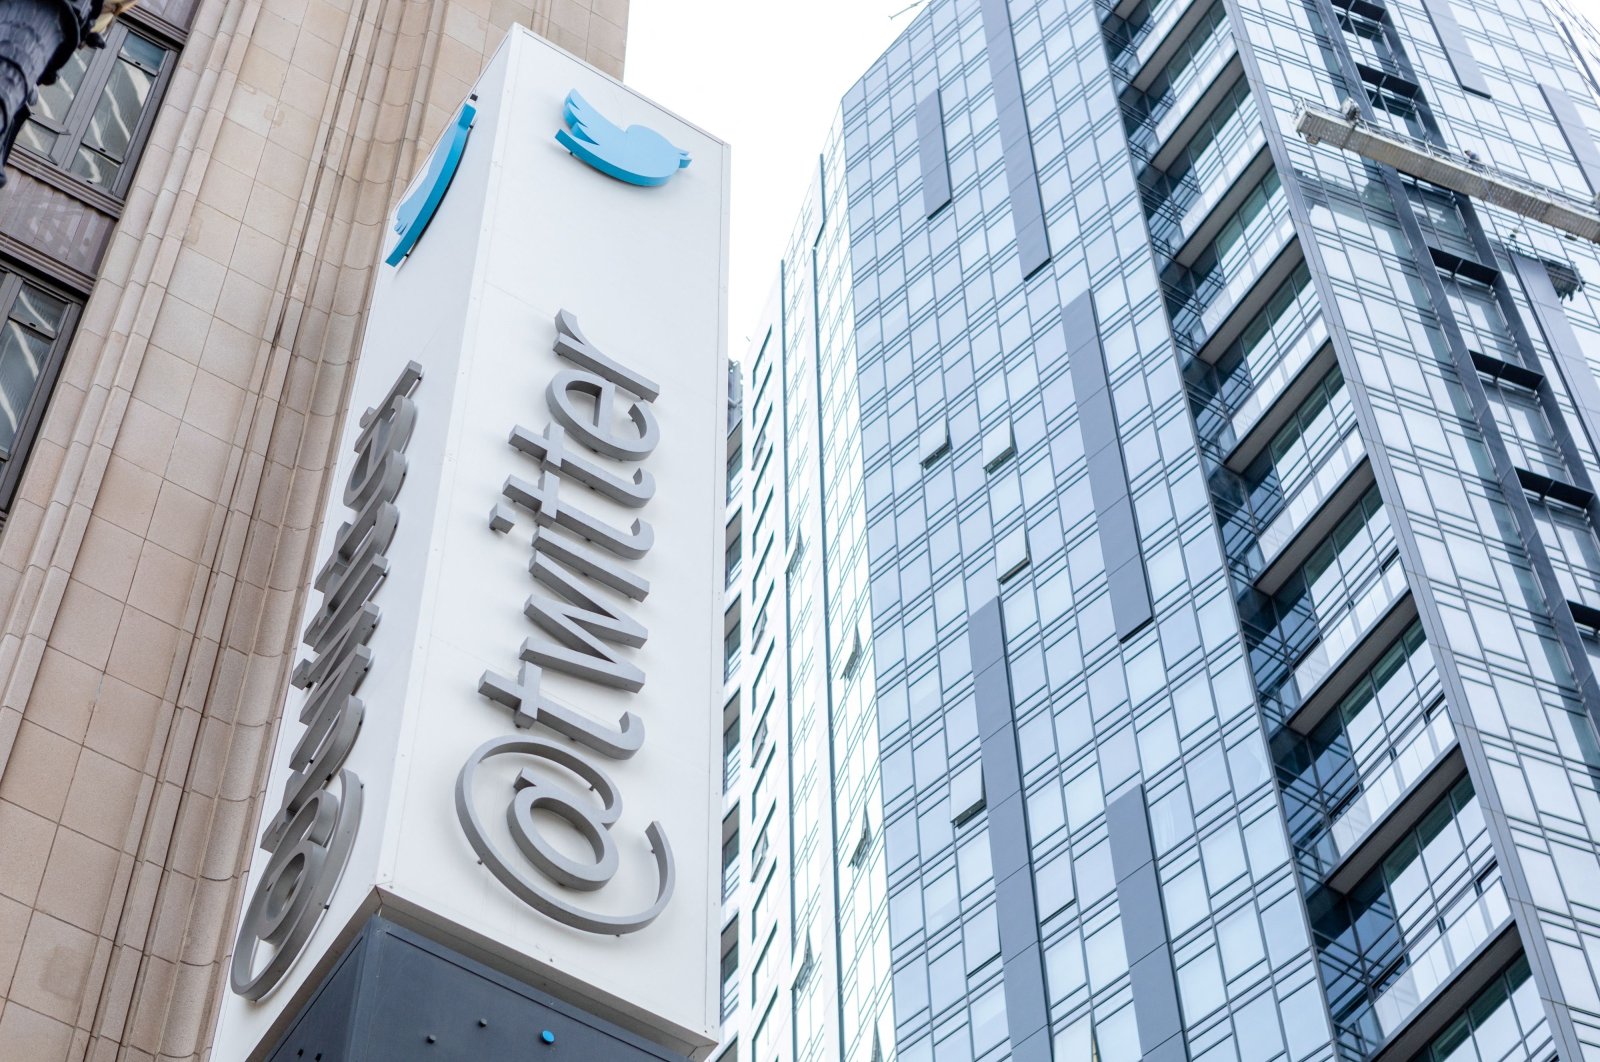 The Twitter sign is seen at its headquarters in San Francisco, California, U.S., Oct. 28, 2022. (AFP Photo)